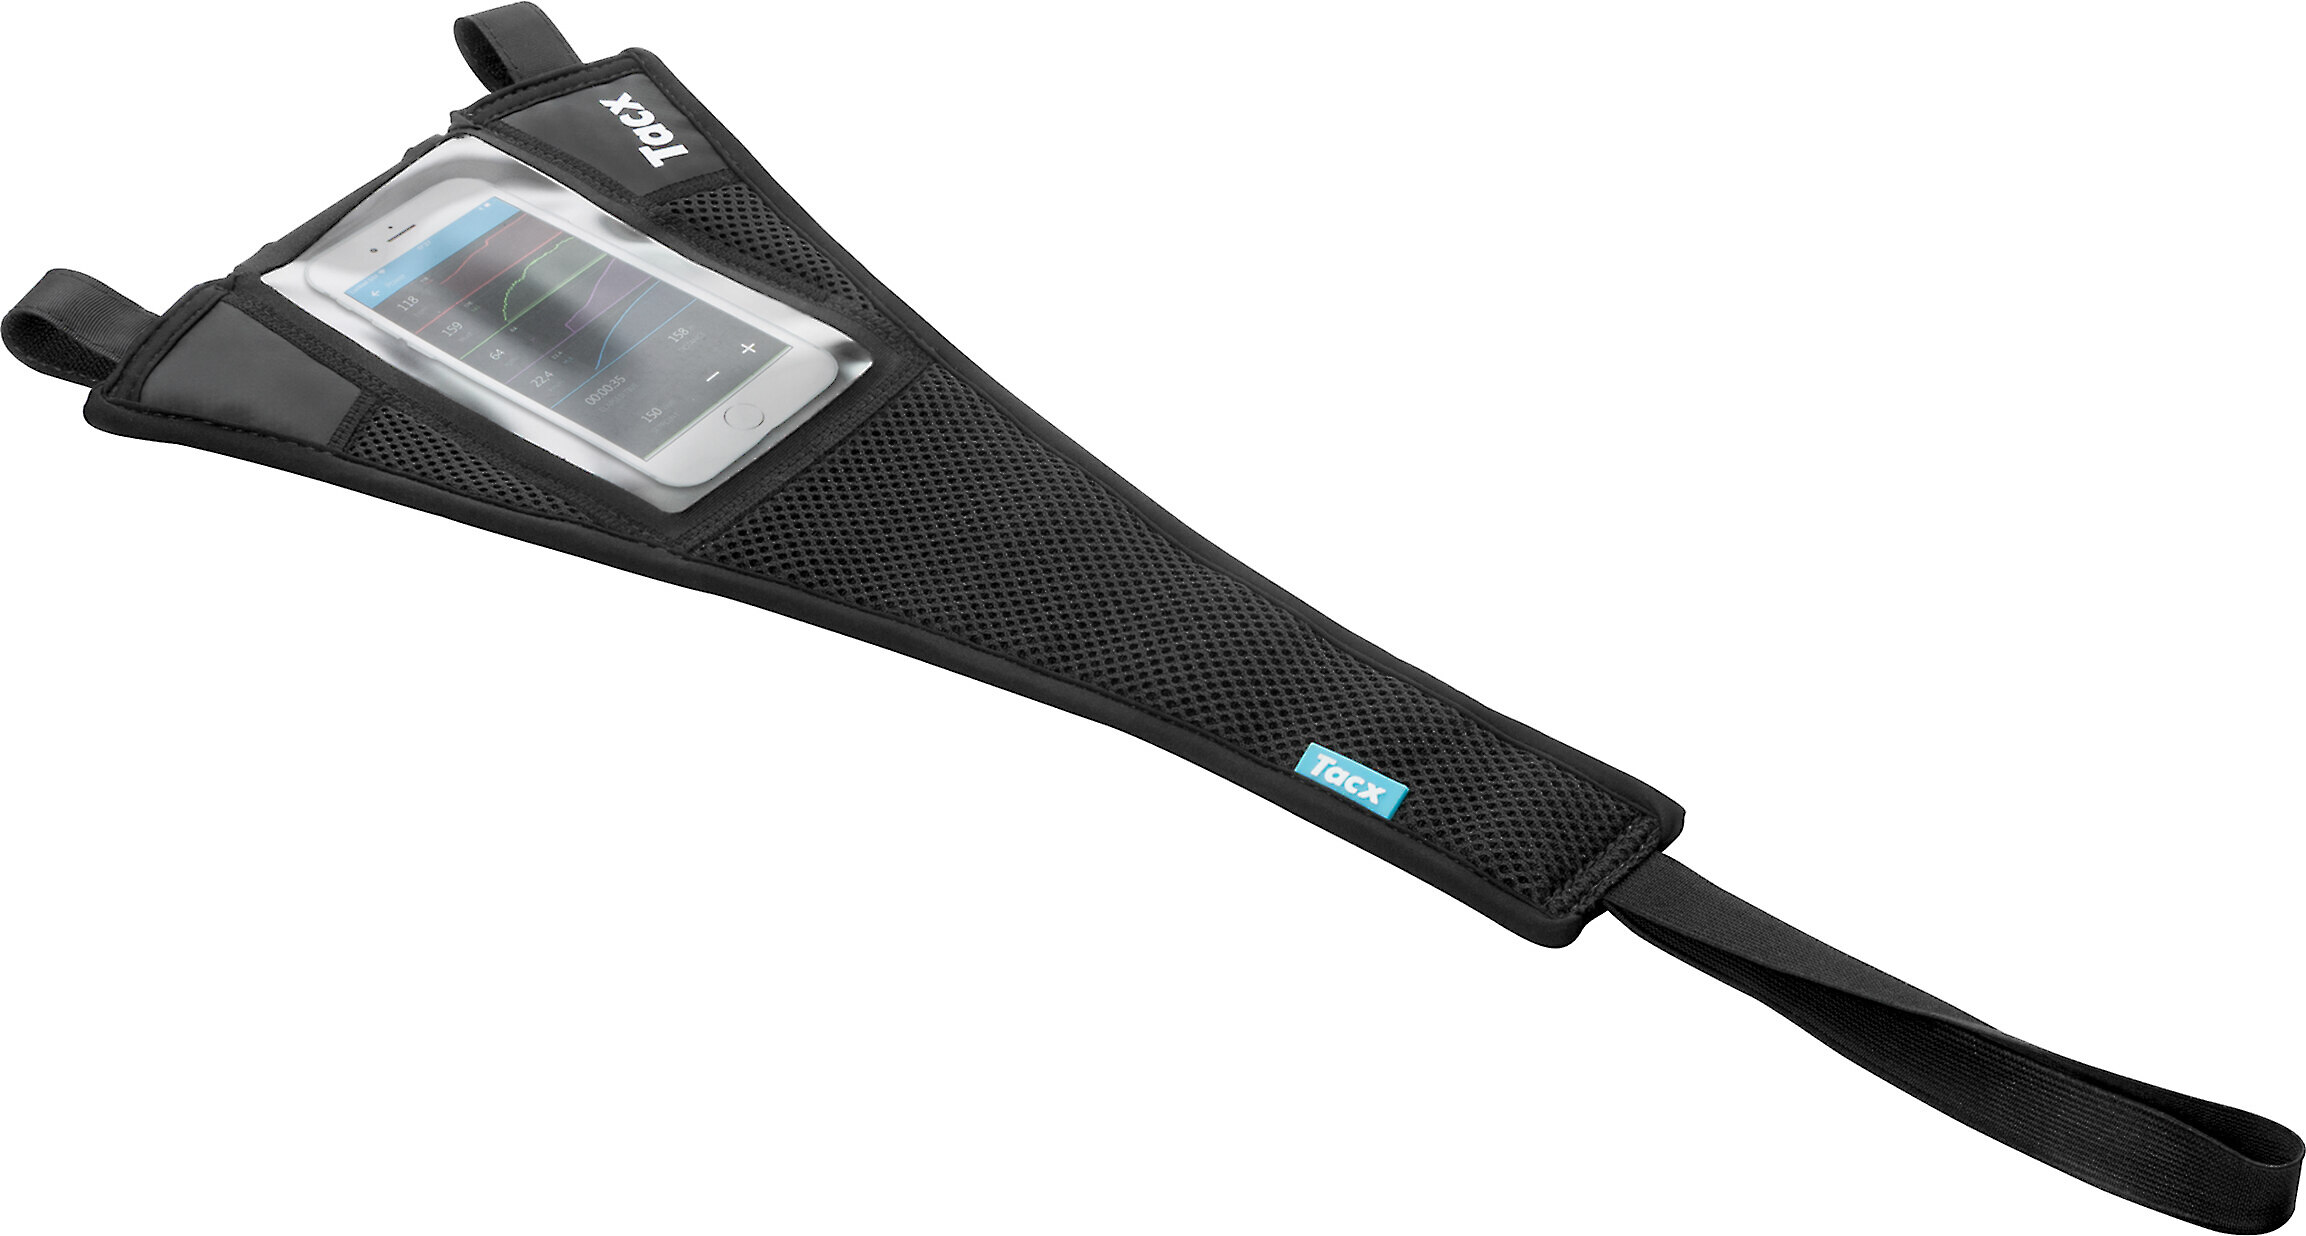 tacx smartphone sweat cover